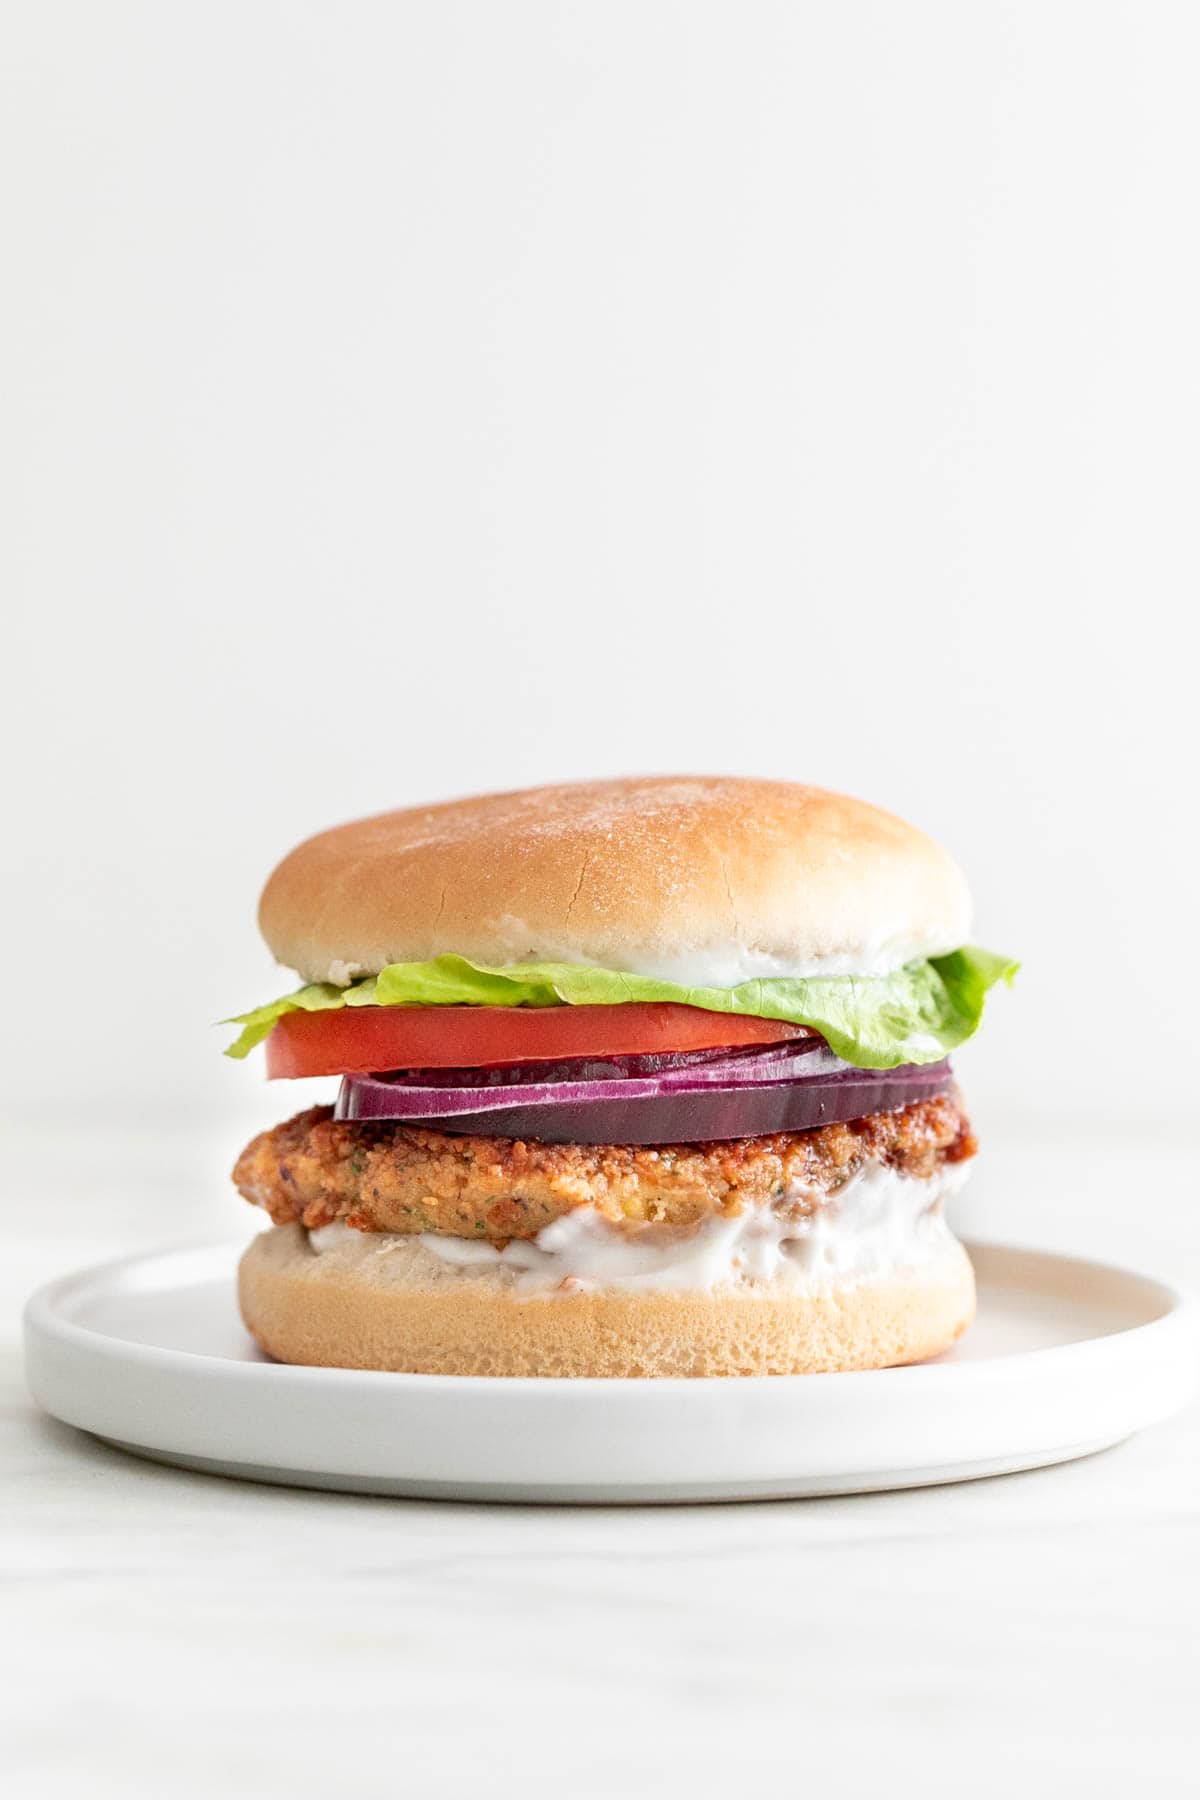 Chickpea burger patty on bun with lettuce, tomato, red onion, and mayo.